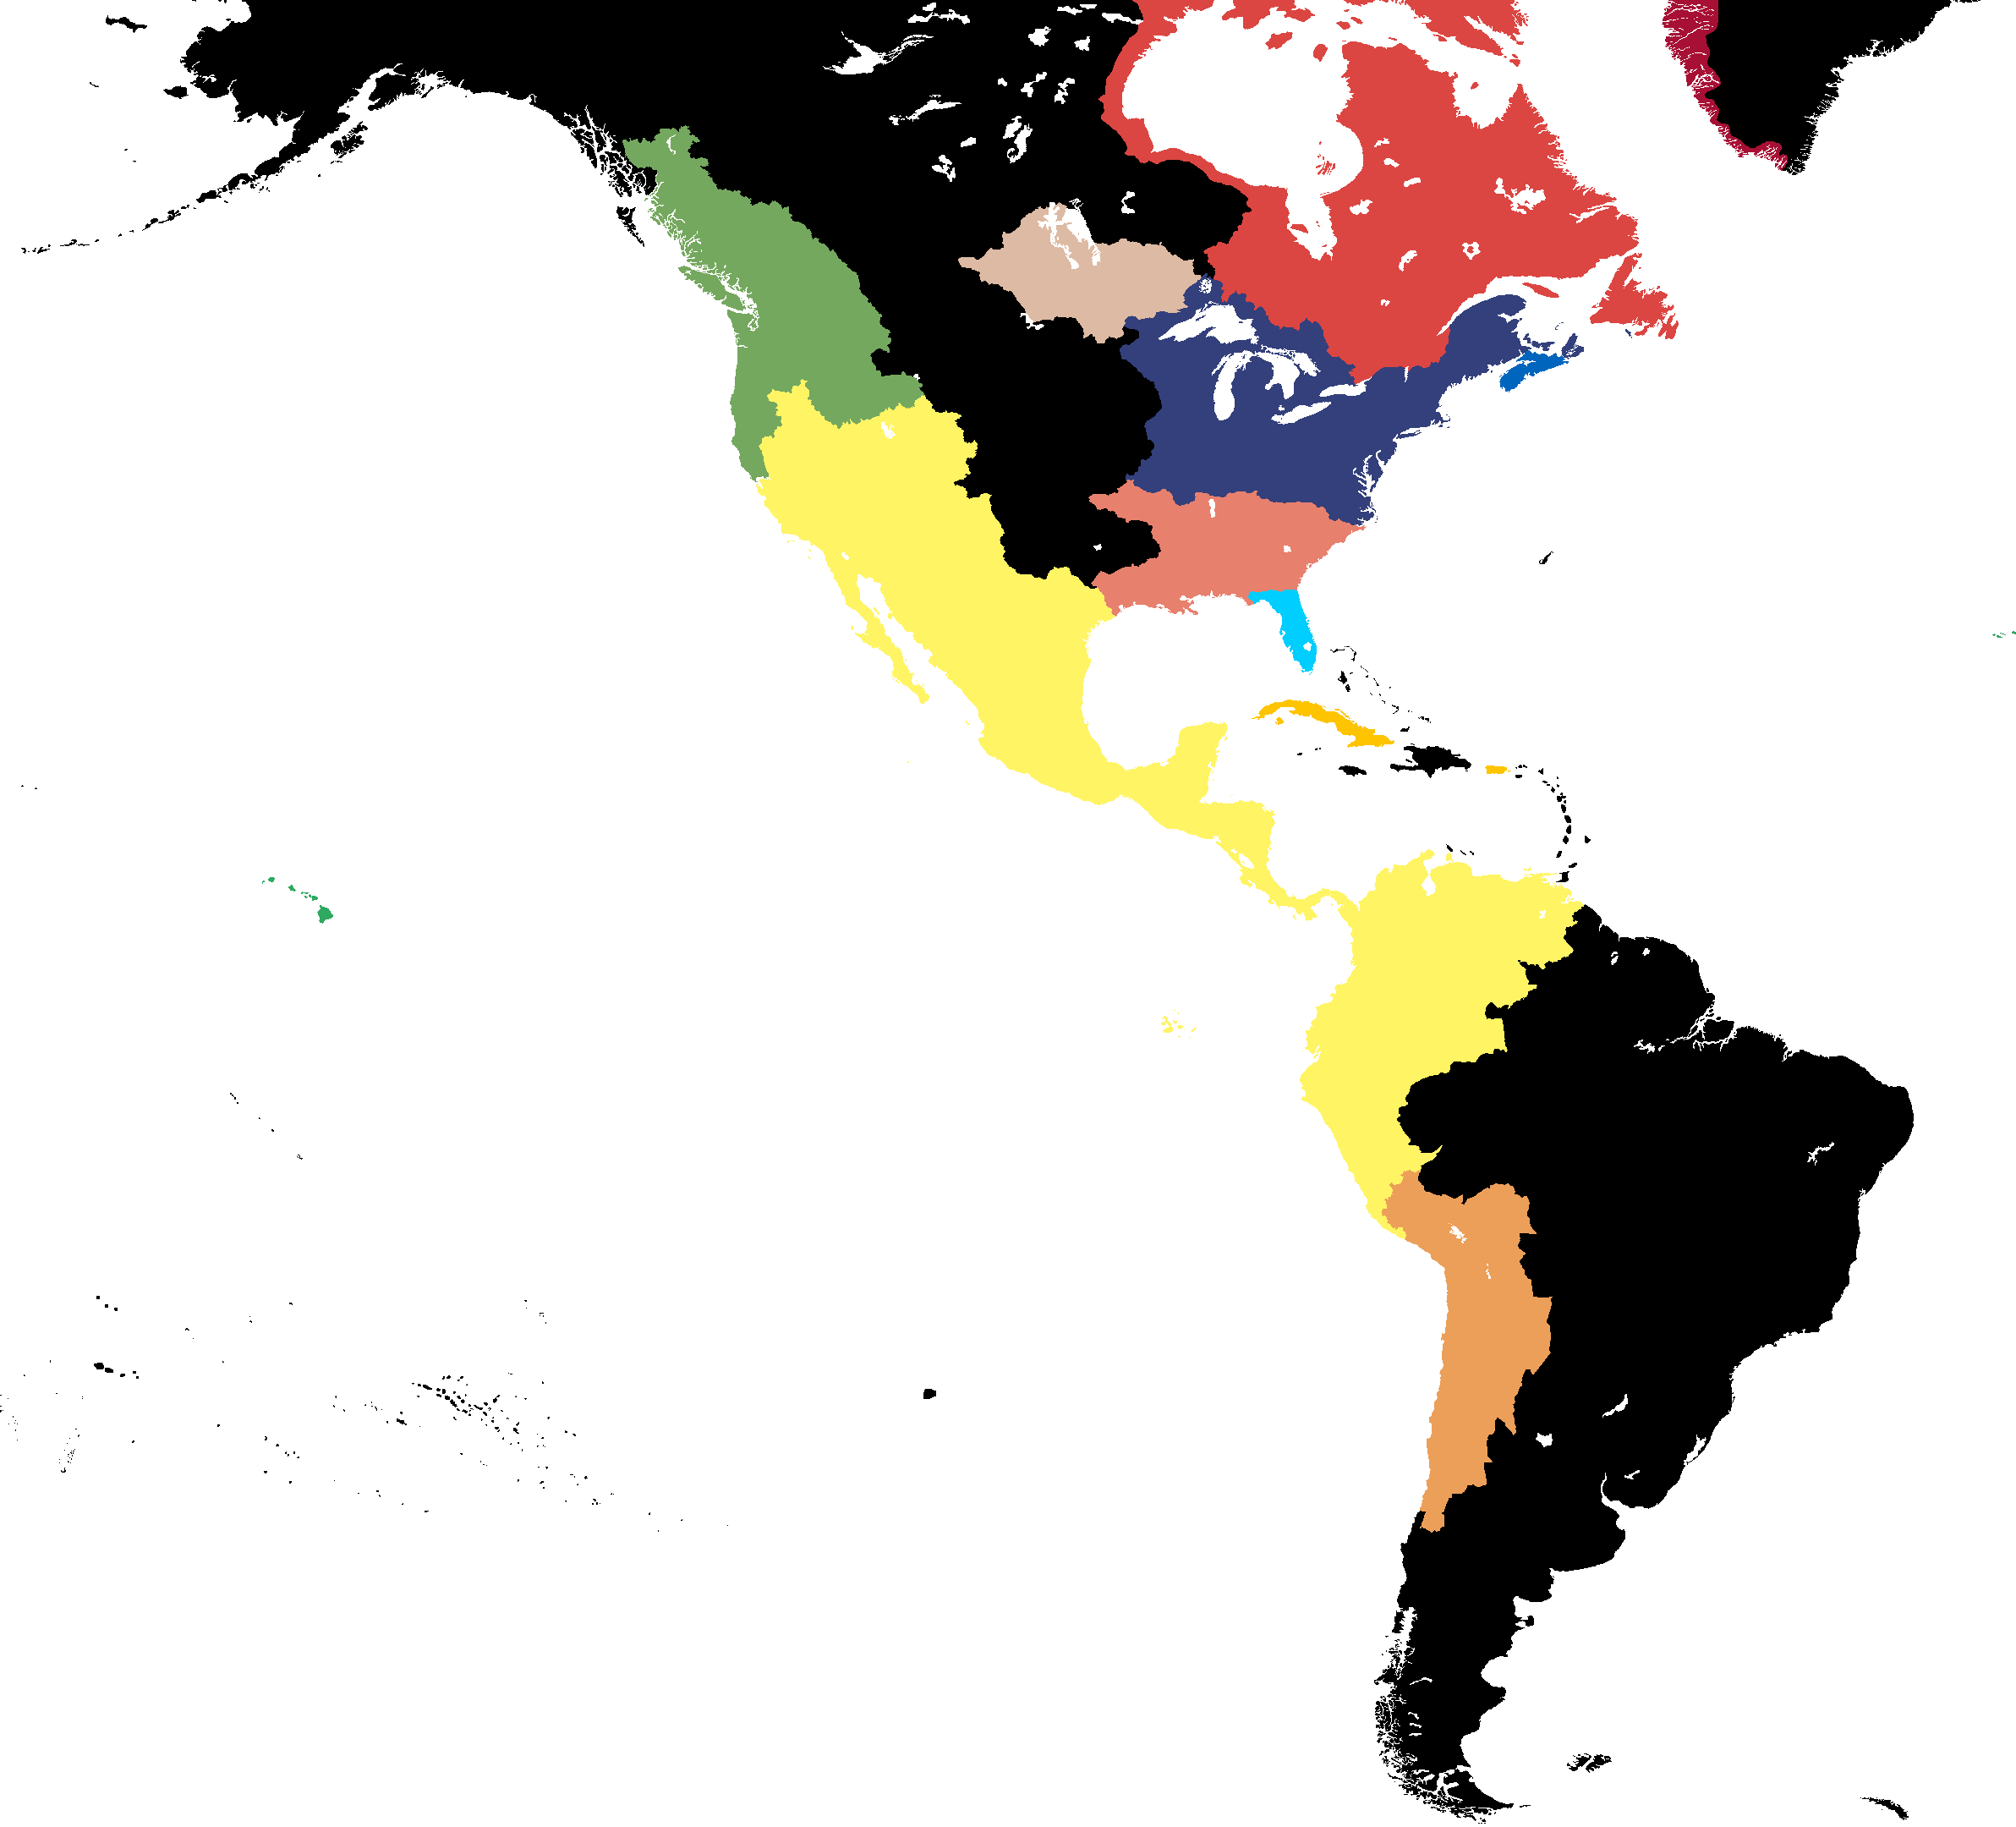 V2_MAP_CLM_1836.1.1_1.png